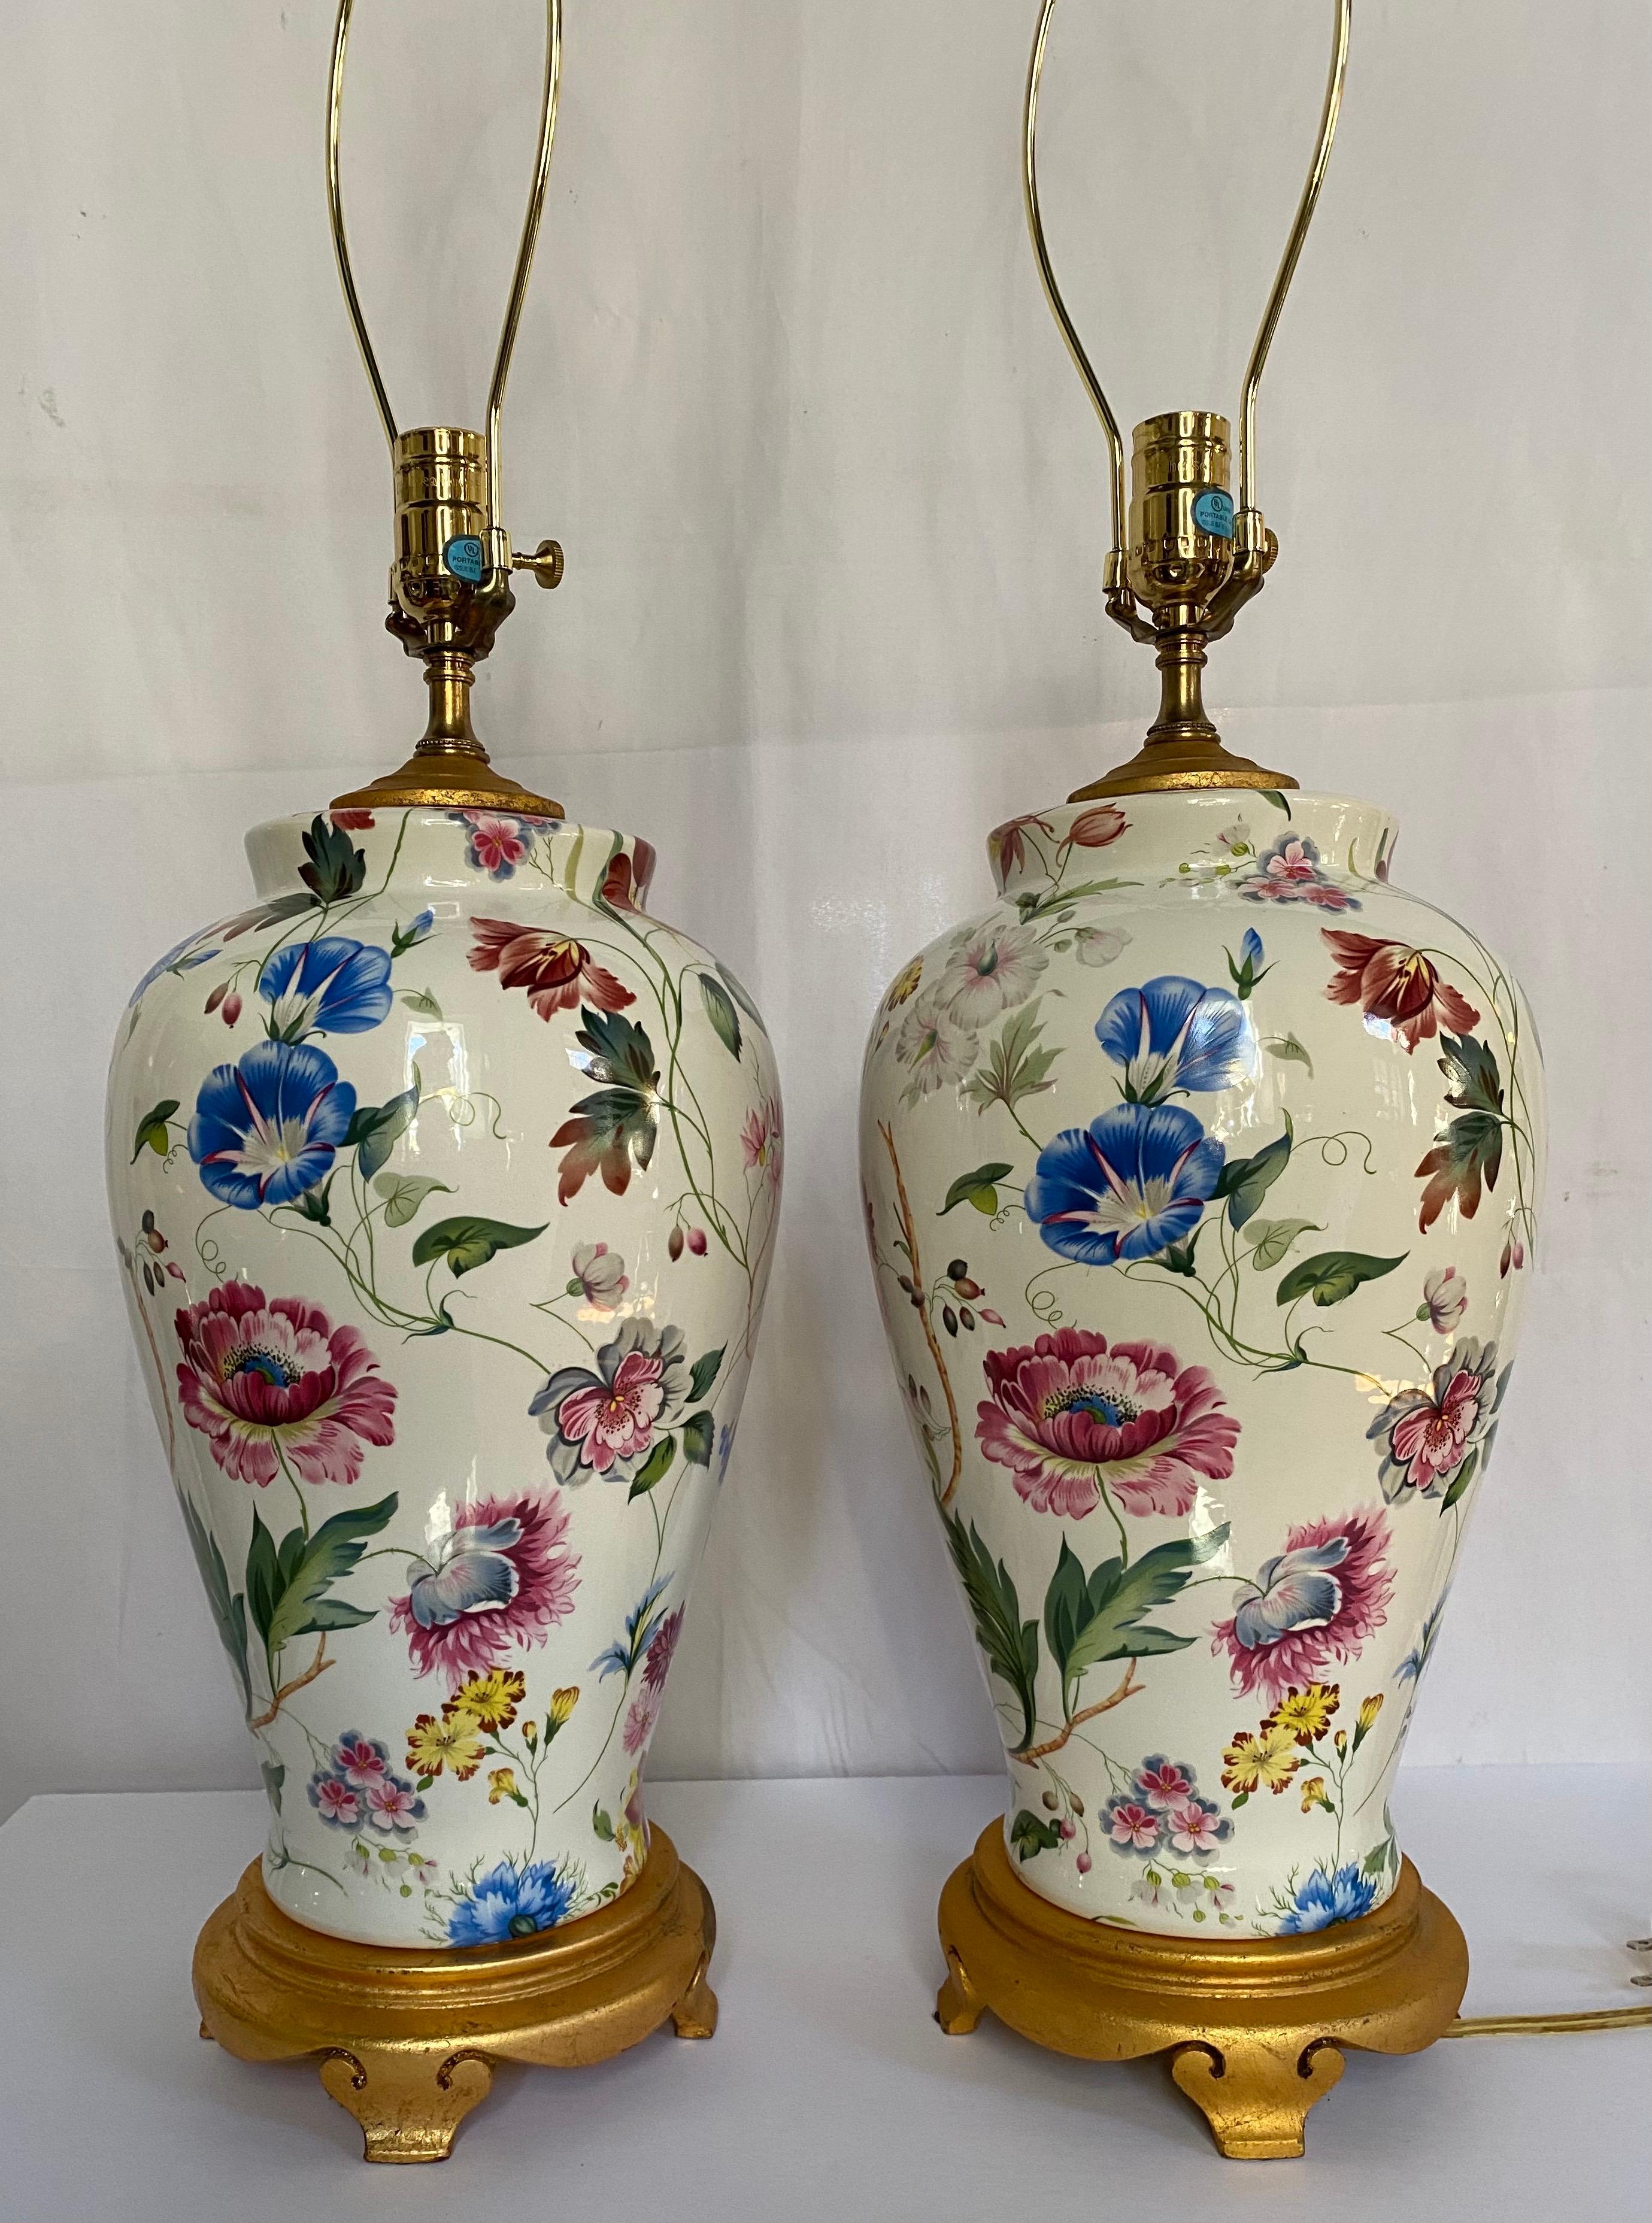 Pair of porcelain botanical table lamps by Chelsea House. These ginger jar urn shaped lamps feature vibrant hand painted floral and vine decorations and are mounted on gilt composite plinth footed bases.  